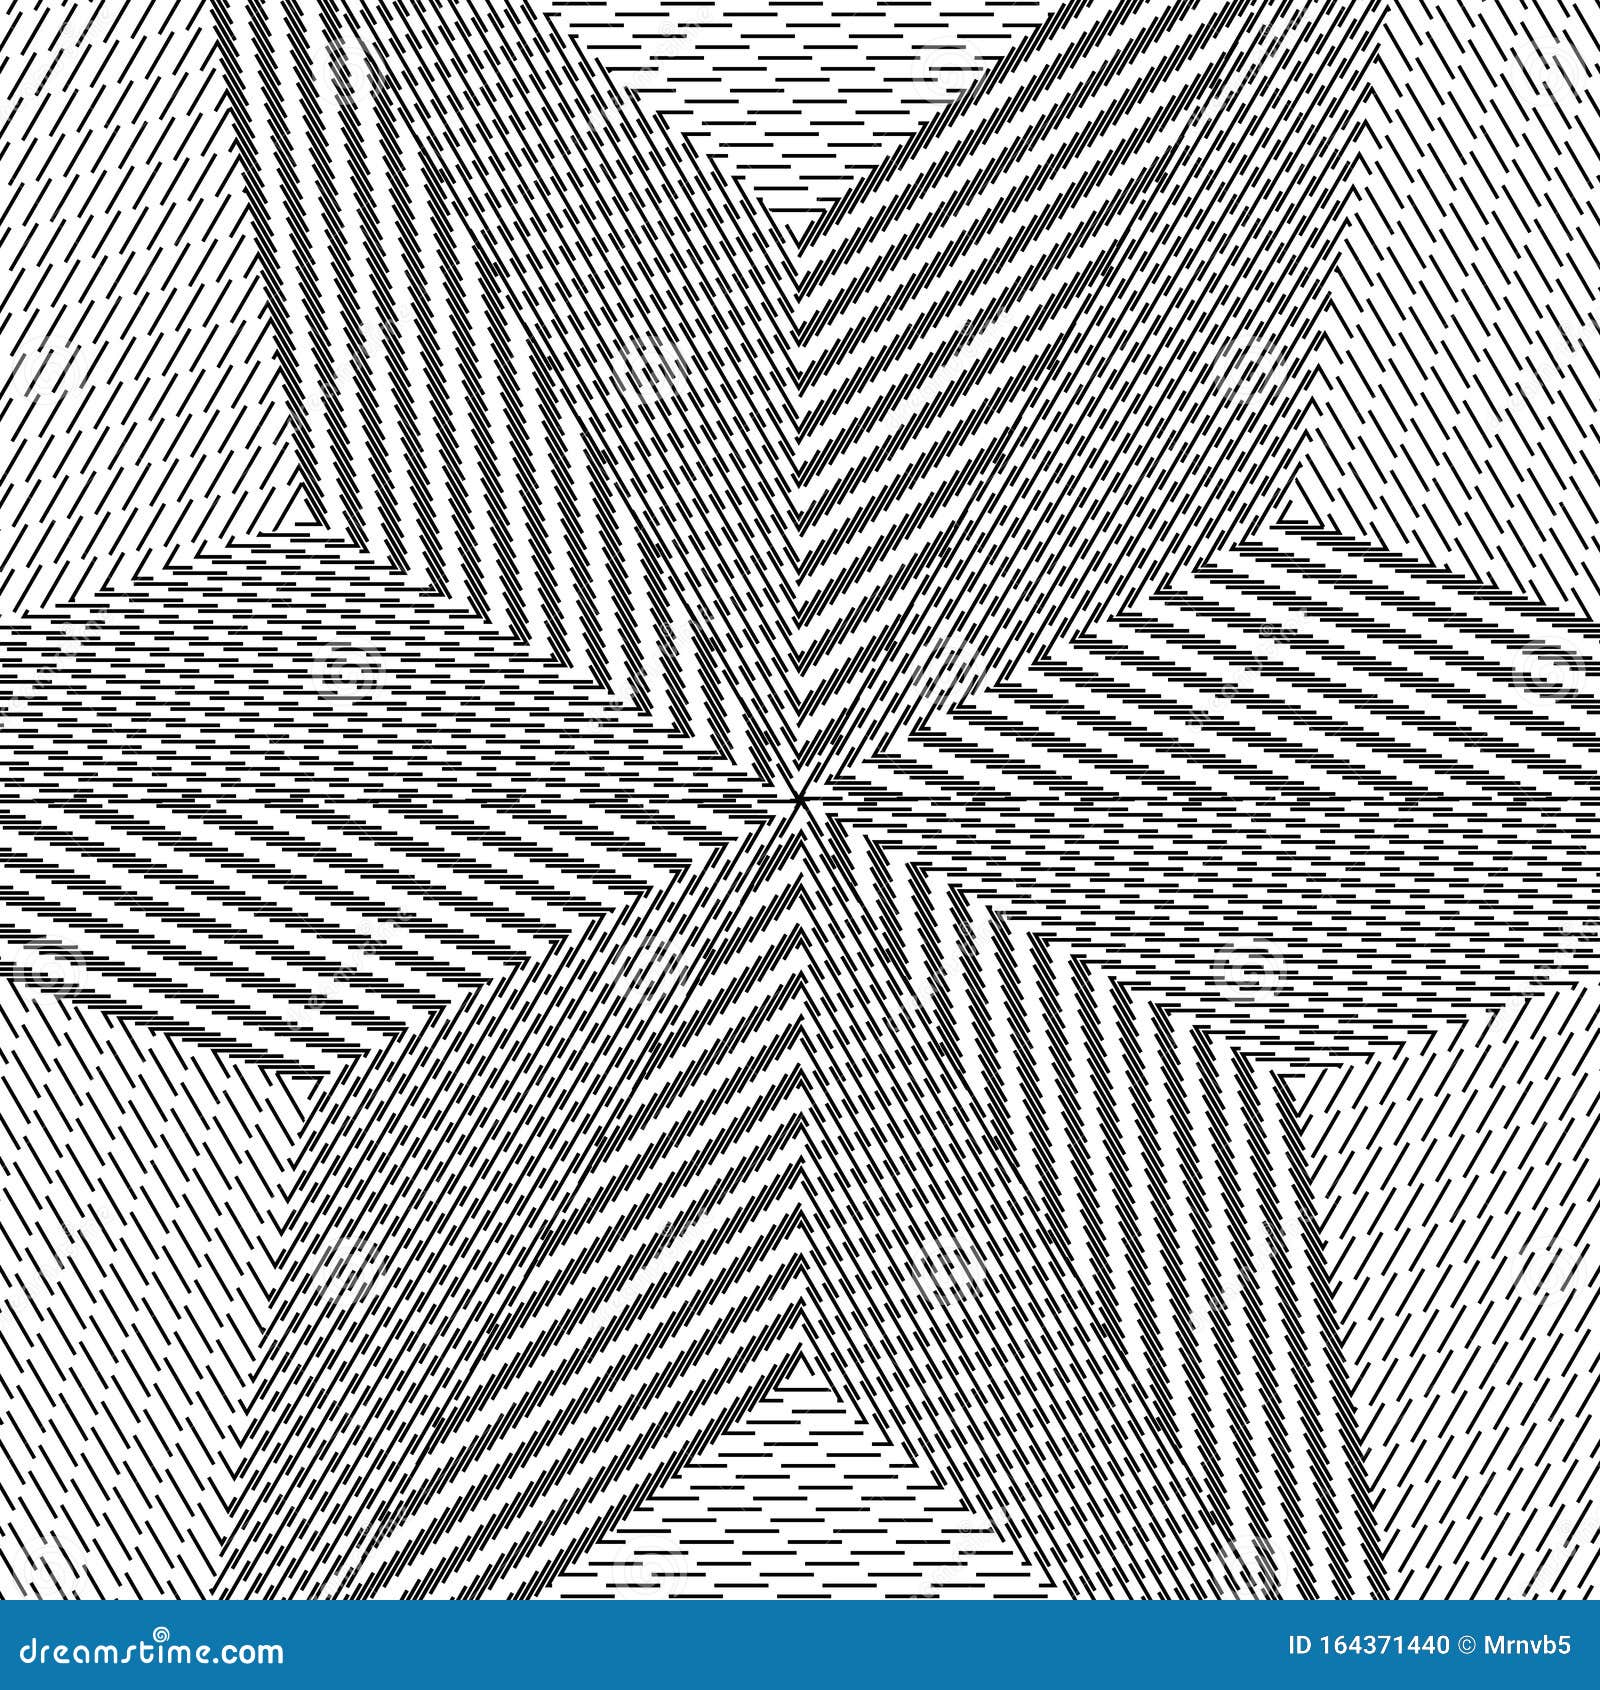 Geometric Pattern With Visual Distortion Effect. Optical Illusion. Op ...